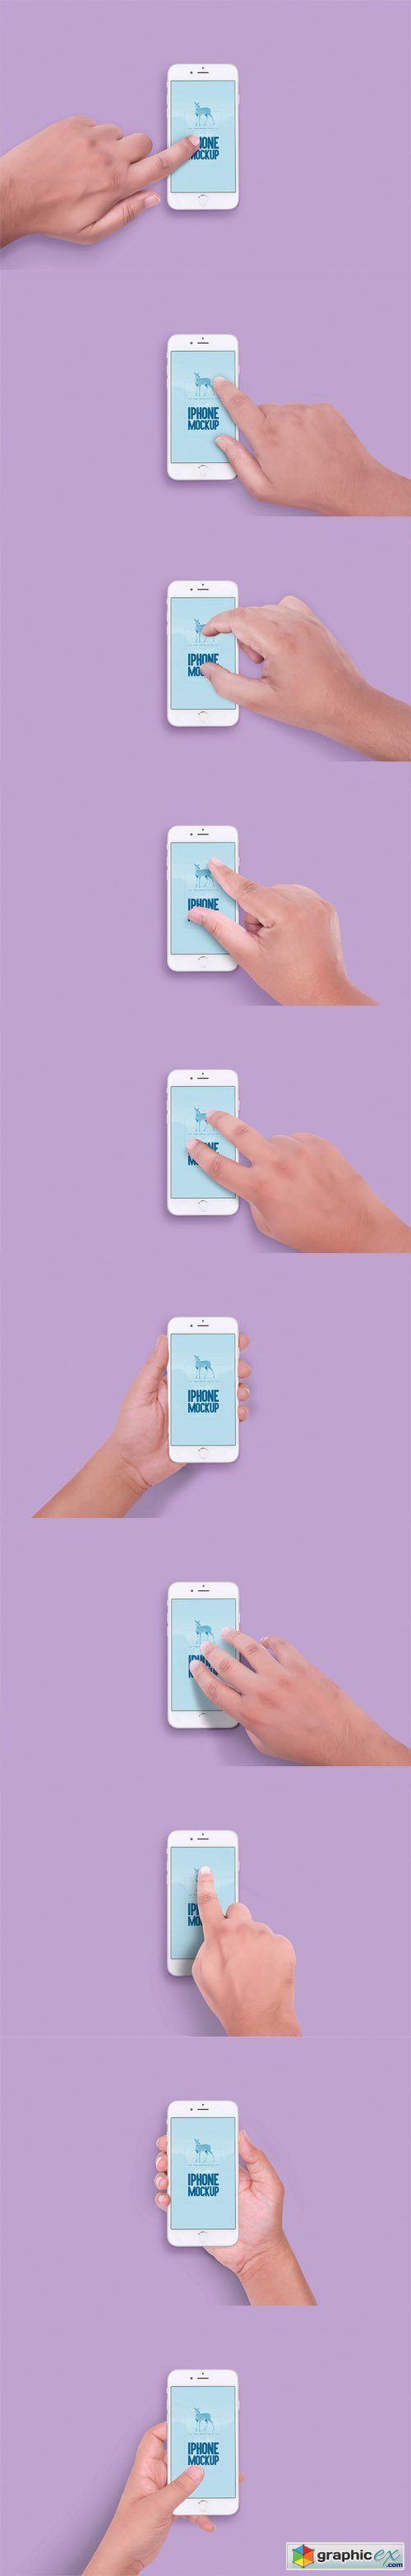 iPhone 6S Mockup With 7 Unique Gestures And 8 Holding Positions